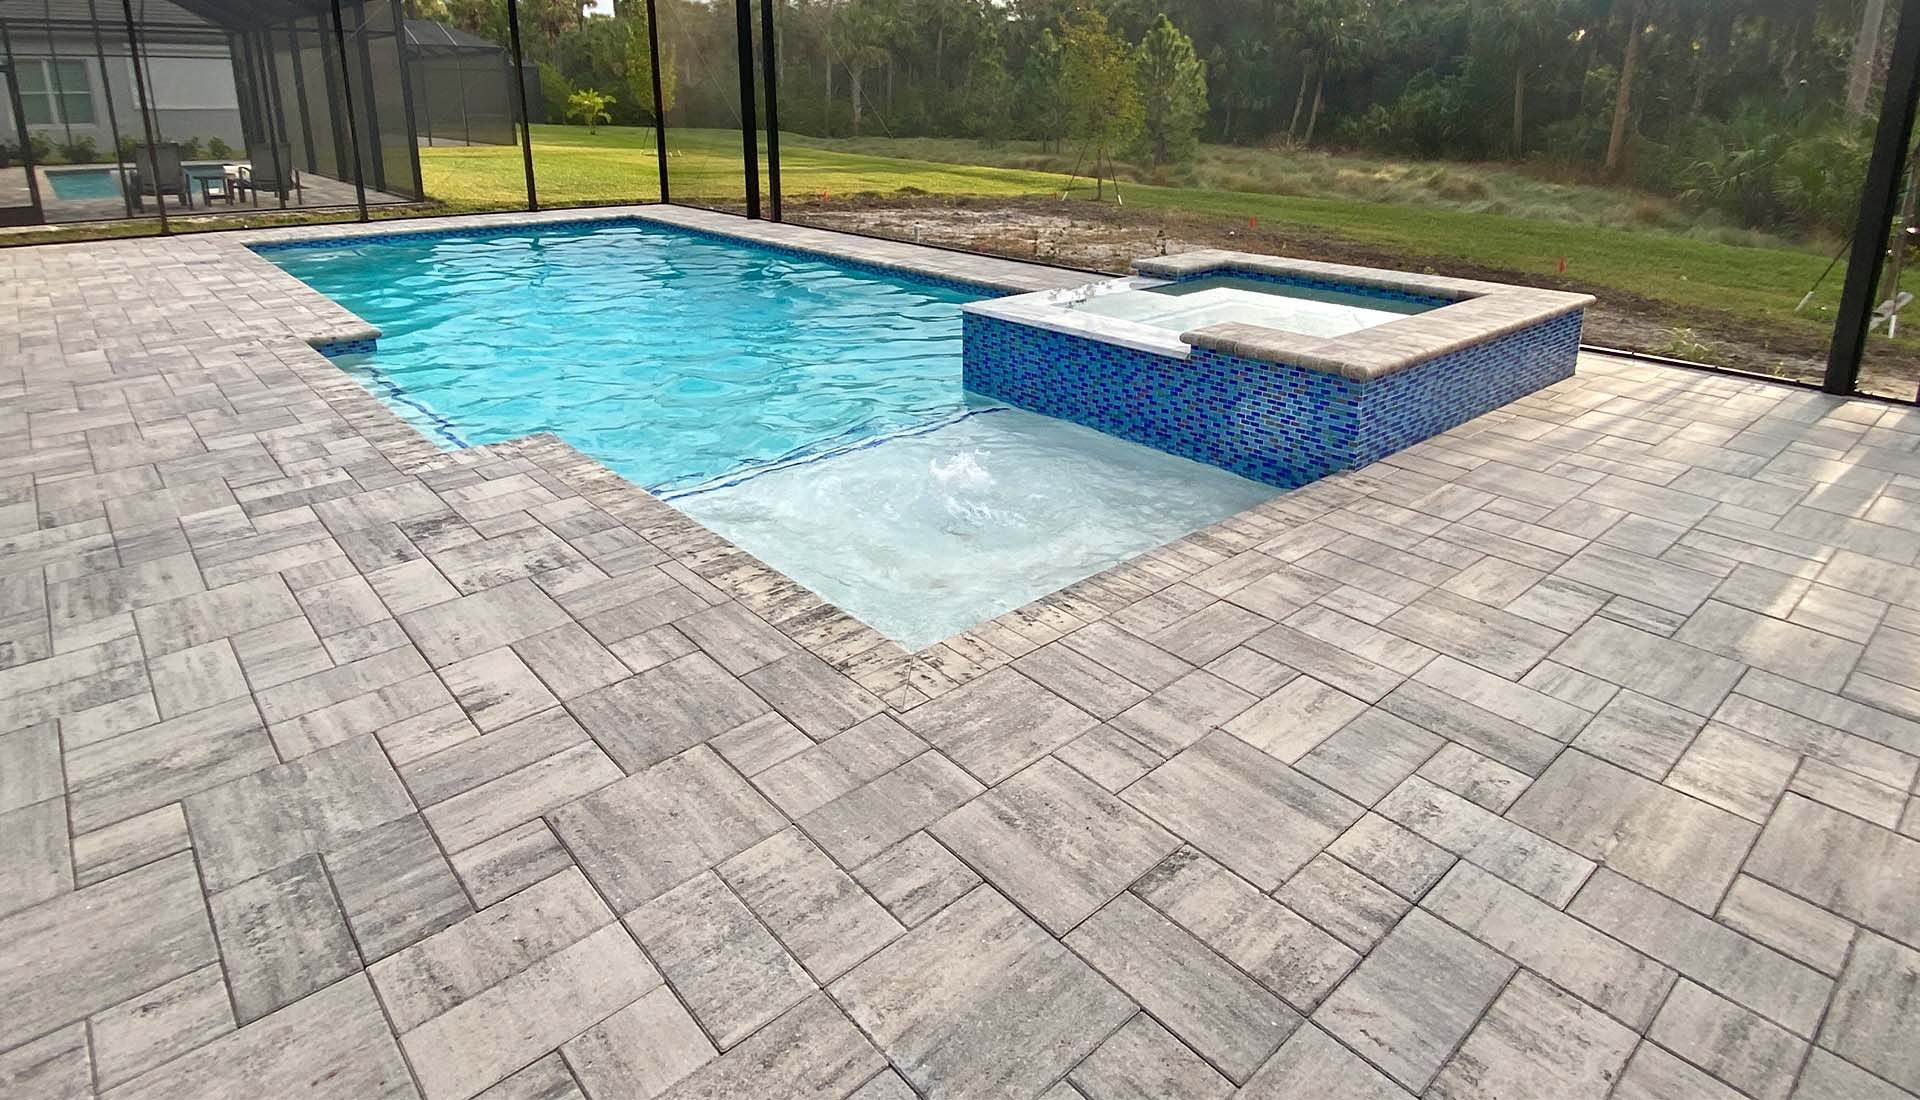 4 - Photo of Cement Pavers and spa - Pool and Deck Concepts, Naples, FL